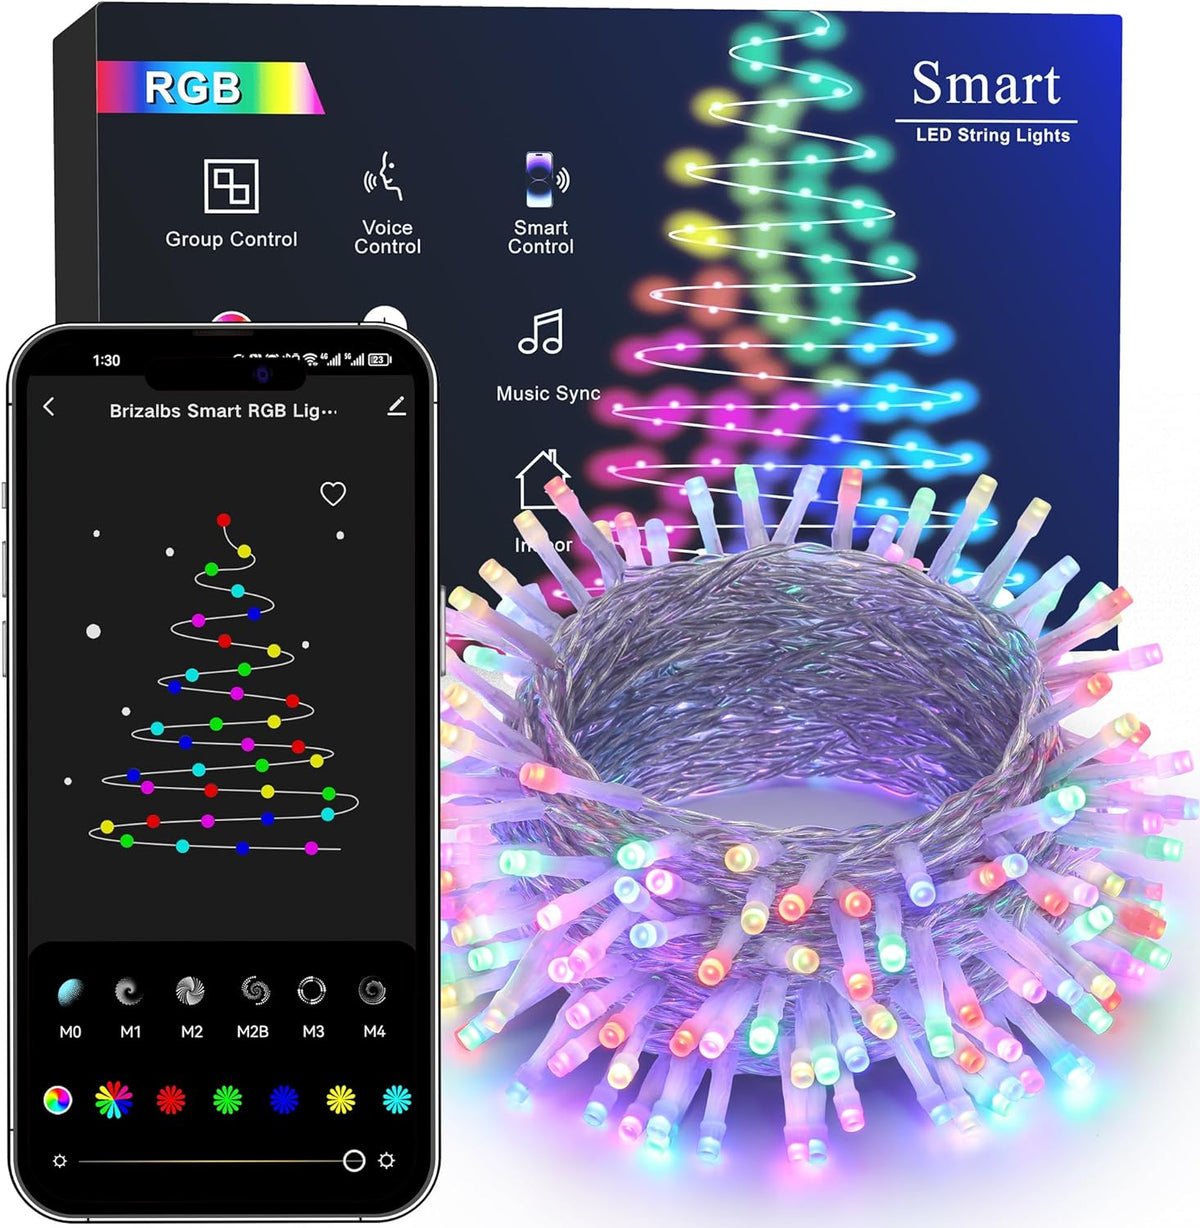 Smart RGB String Lights, 65ft 198 LED Fairy Lights App Control, Dimmable Christmas Lights, Color Changing Xmas Tree Lights Clear Wire Work with Alexa Google Home for Outdoor Indoor Party Decor